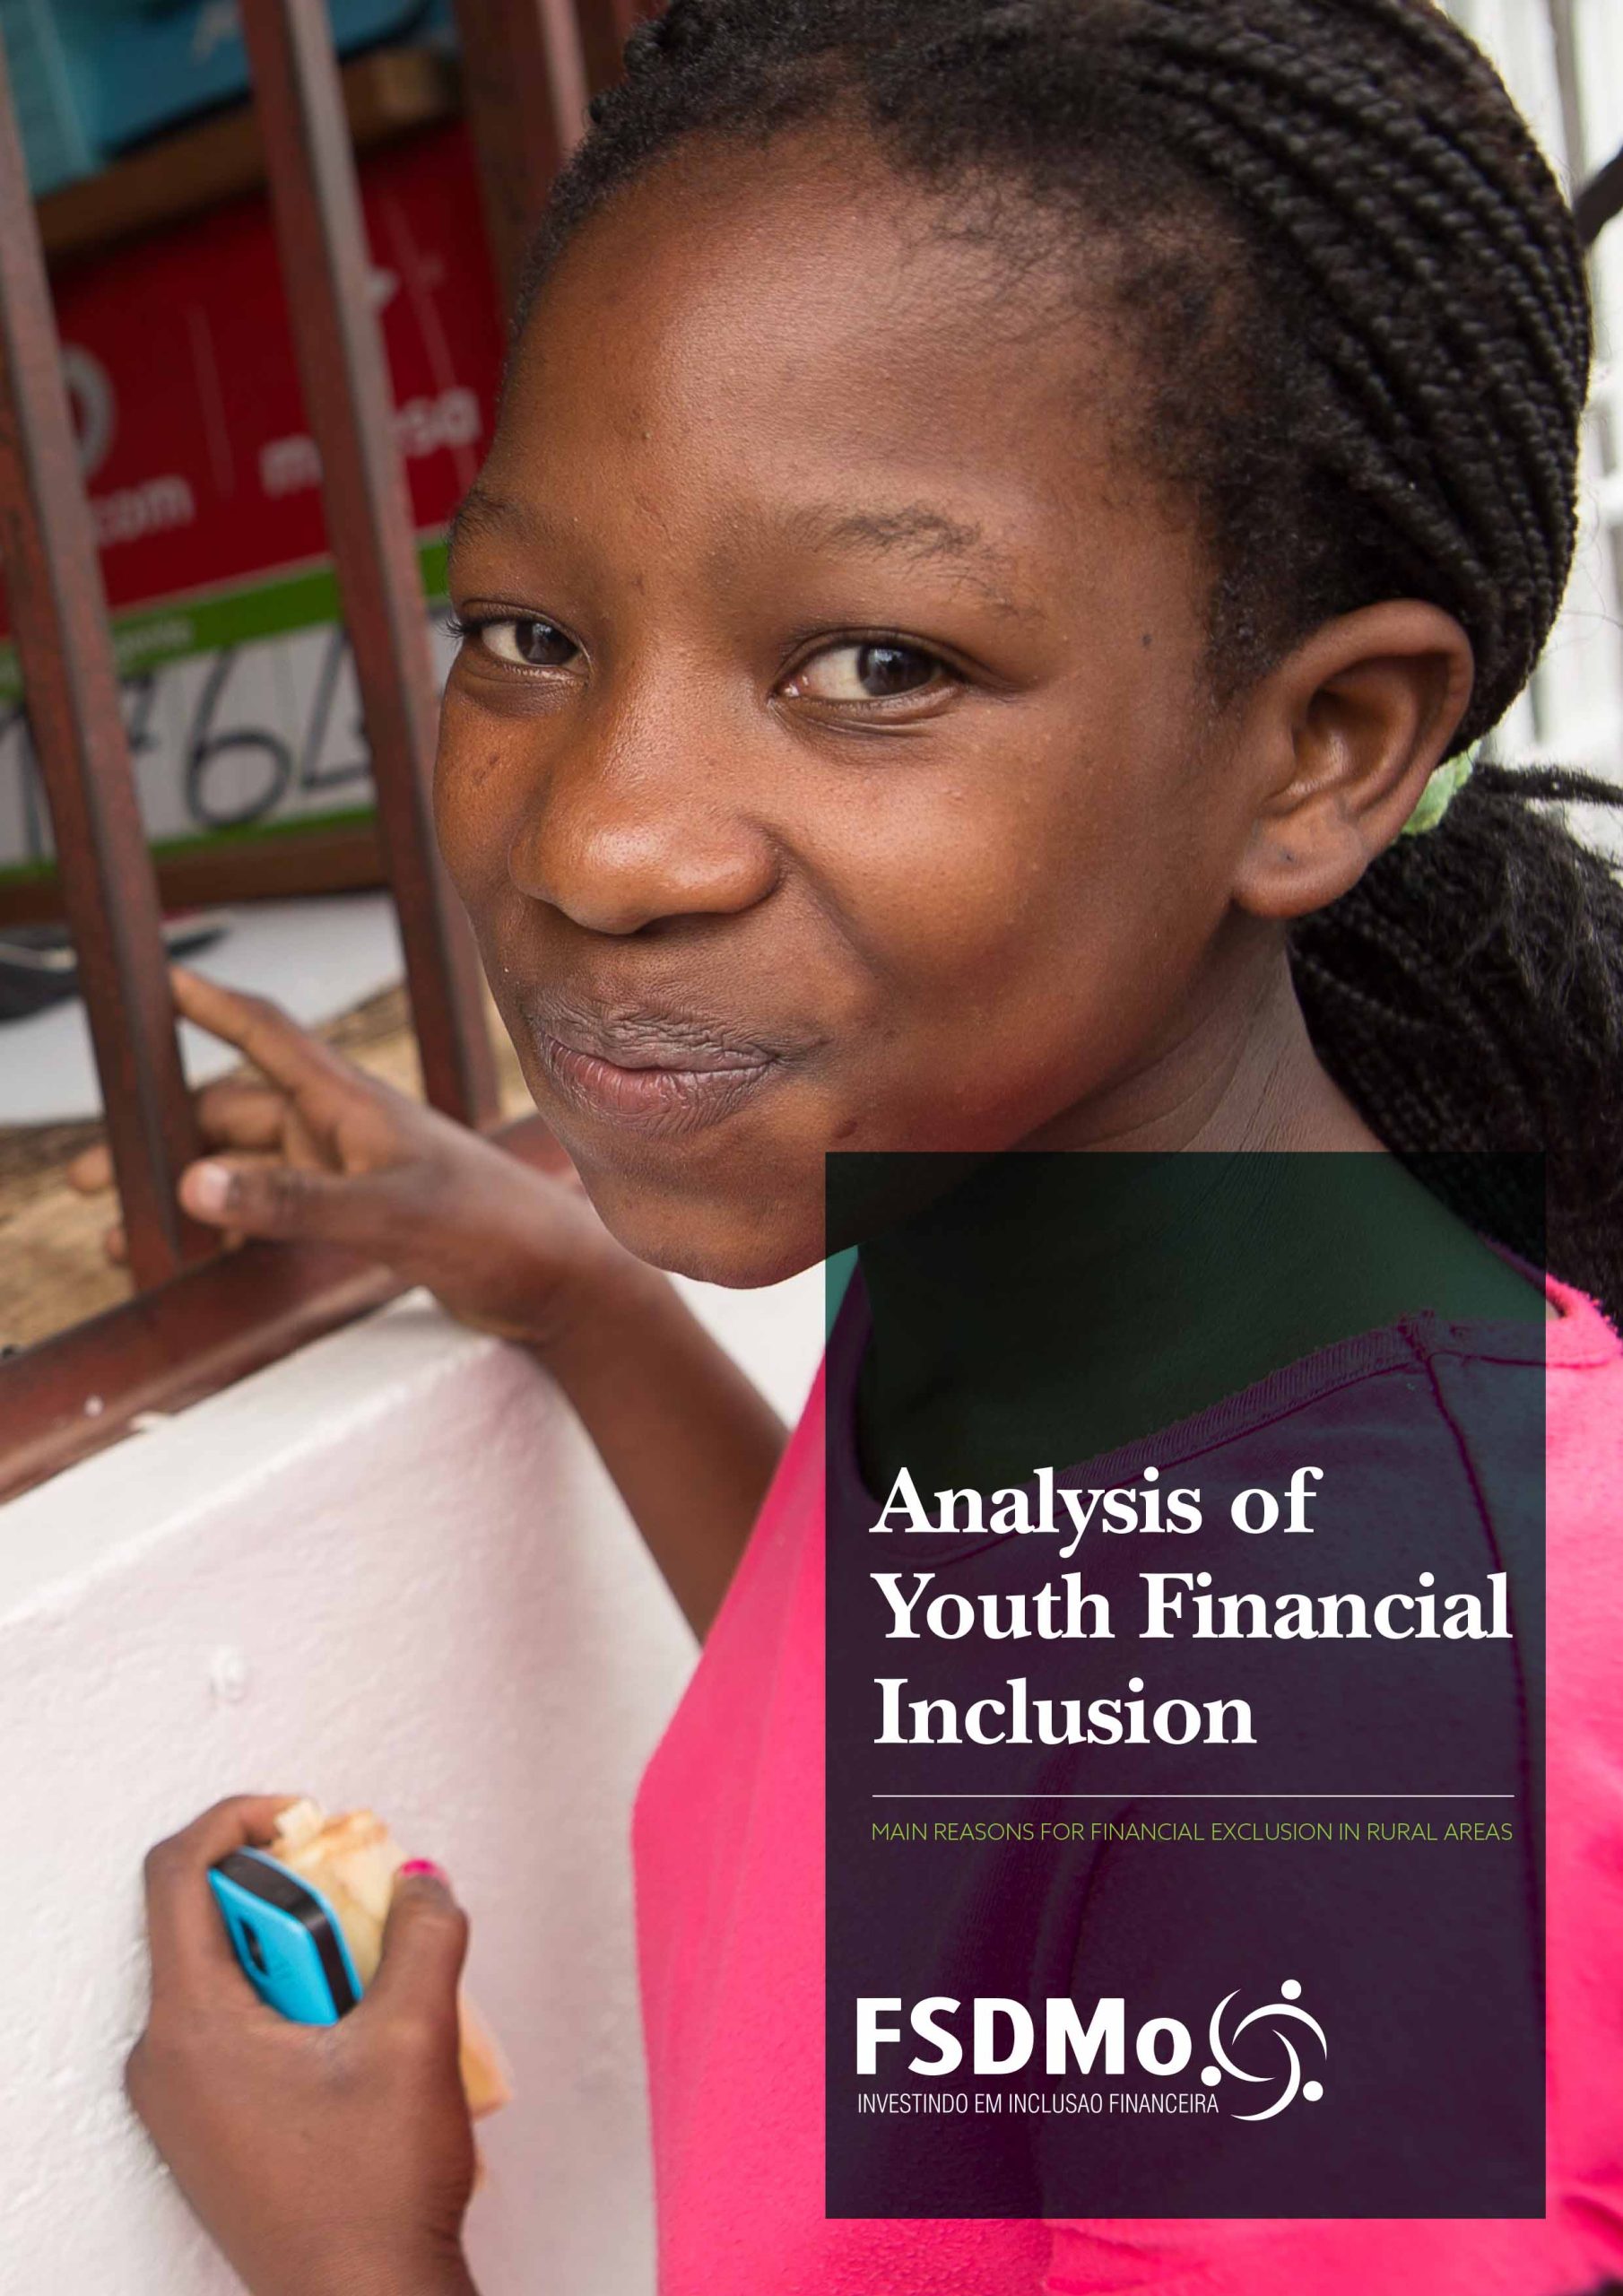 <!DOCTYPE html> <html lang="en"> <head>     <meta charset="UTF-8">     <meta name="viewport" content="width=device-width, initial-scale=1.0">     <title>ANALYSIS OF YOUTH FINANCIAL INCLUSION</title>     <style>         a {             color: #8FC73F;             text-decoration: none; /* Remove underline */             transition: color 0.3s; /* Smooth transition for color change */         }          a:hover {             color: #ffffff; /* Change color to white on hover */         }     </style> </head> <body>     <p><a href="https://www.fsdmoc.org.mz/wp-content/uploads/2023/06/ANALYSIS_OF_YOUTH_FINANCIAL_INCLUSION.pdf" target="_blank">ANALYSIS OF YOUTH FINANCIAL INCLUSION</a></p> </body> </html>